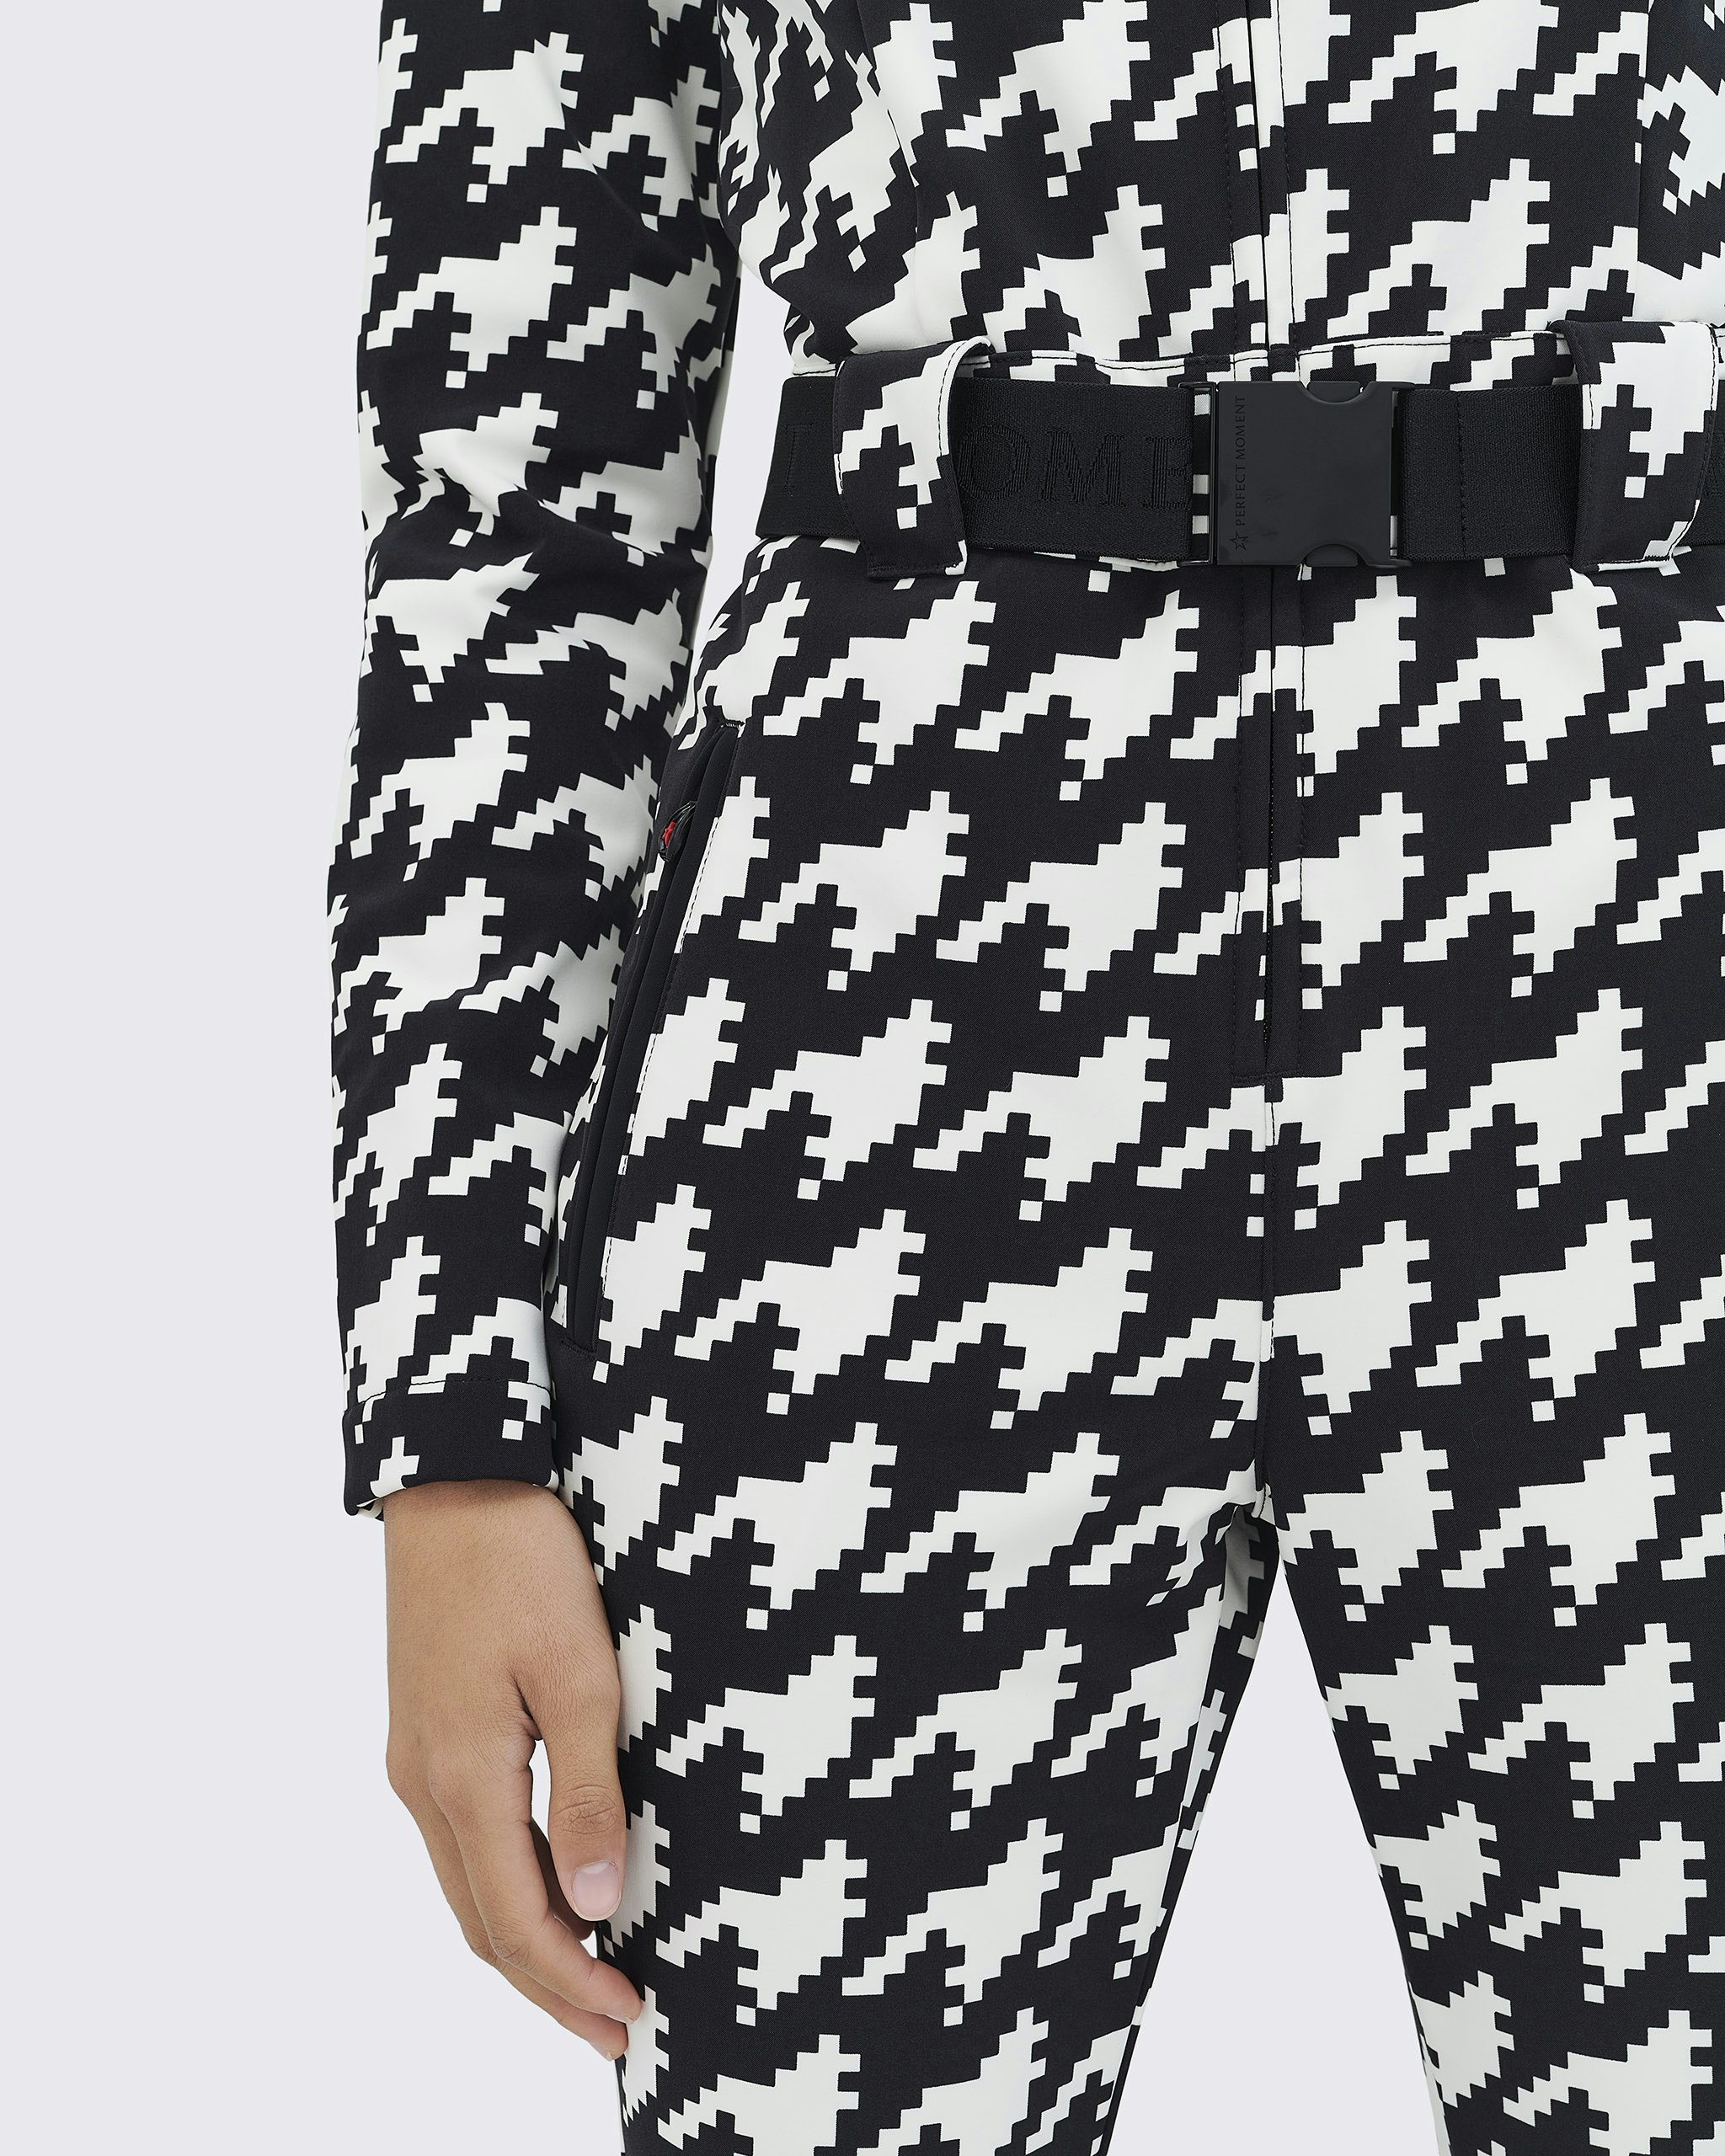 All you need is a pair of cool houndstooth pants this winter